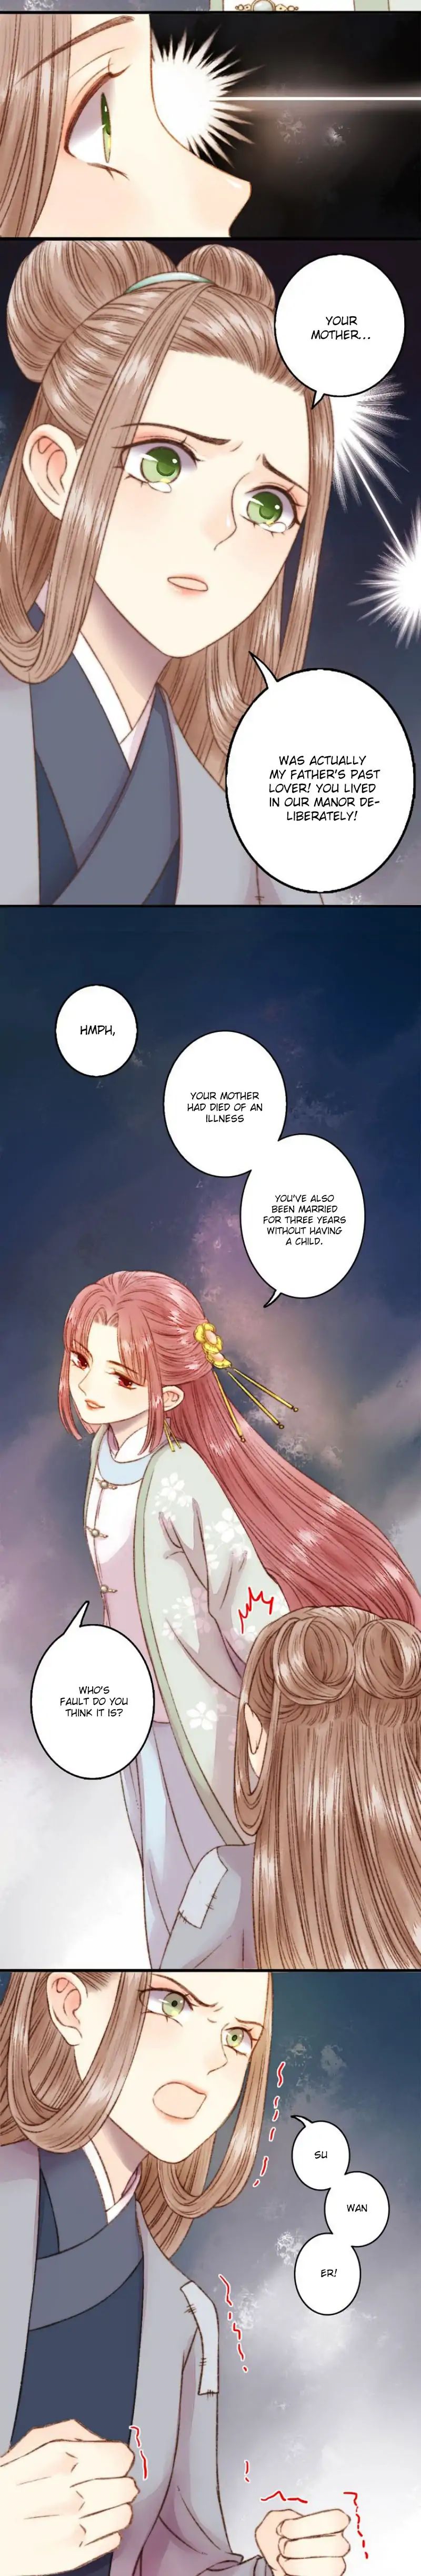 The Goddess of Healing chapter 2